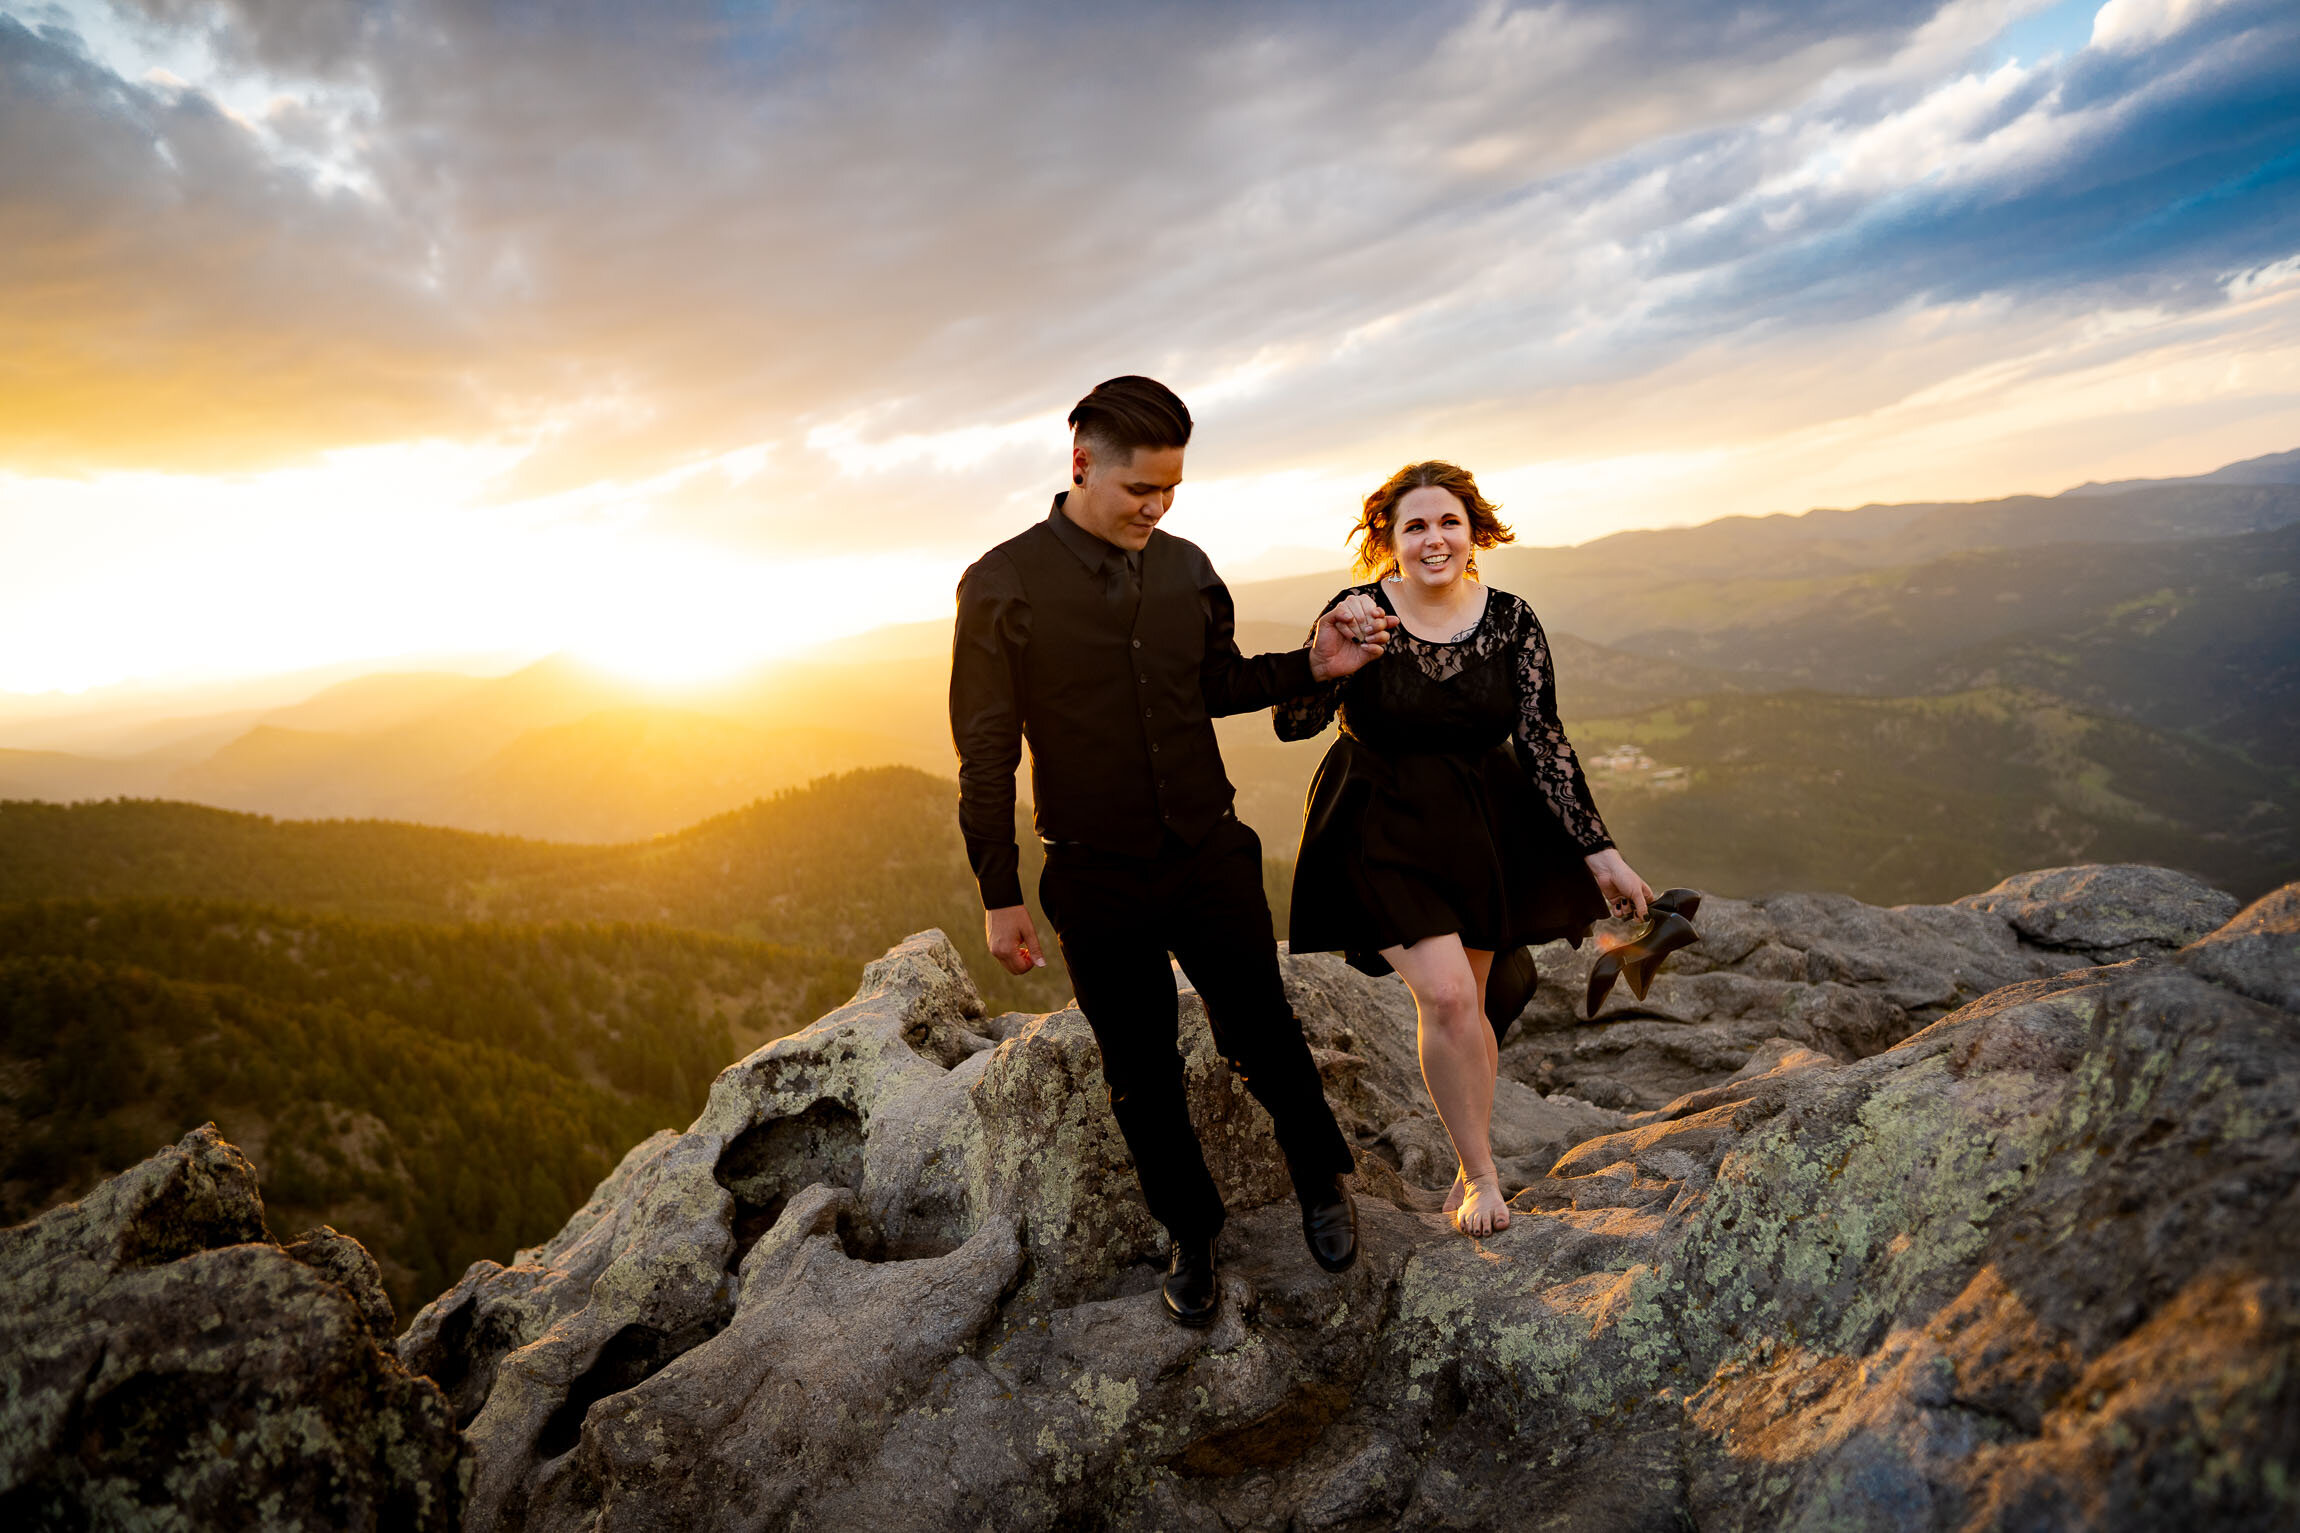 Engaged couple holds hands and watches the sun set from rocky ledge overlooking the mountains, Engagement Session, Sunset Engagement photos, Engagement Photos, Engagement Photos Inspiration, Engagement Photography, Engagement Photographer, Summer Engagement Photos, Mountain Engagement Photos, Lost Gulch Overlook engagement session, Lost Gulch Overlook engagement photos, Lost Gulch Overlook engagement photography, Lost Gulch Overlook engagement photographer, Lost Gulch Overlook  engagement inspiration, Boulder engagement session, Boulder engagement photos, Boulder engagement photography, Boulder engagement photographer, Boulder engagement inspiration, Colorado engagement session, Colorado engagement photos, Colorado engagement photography, Colorado engagement photographer, Colorado engagement inspiration